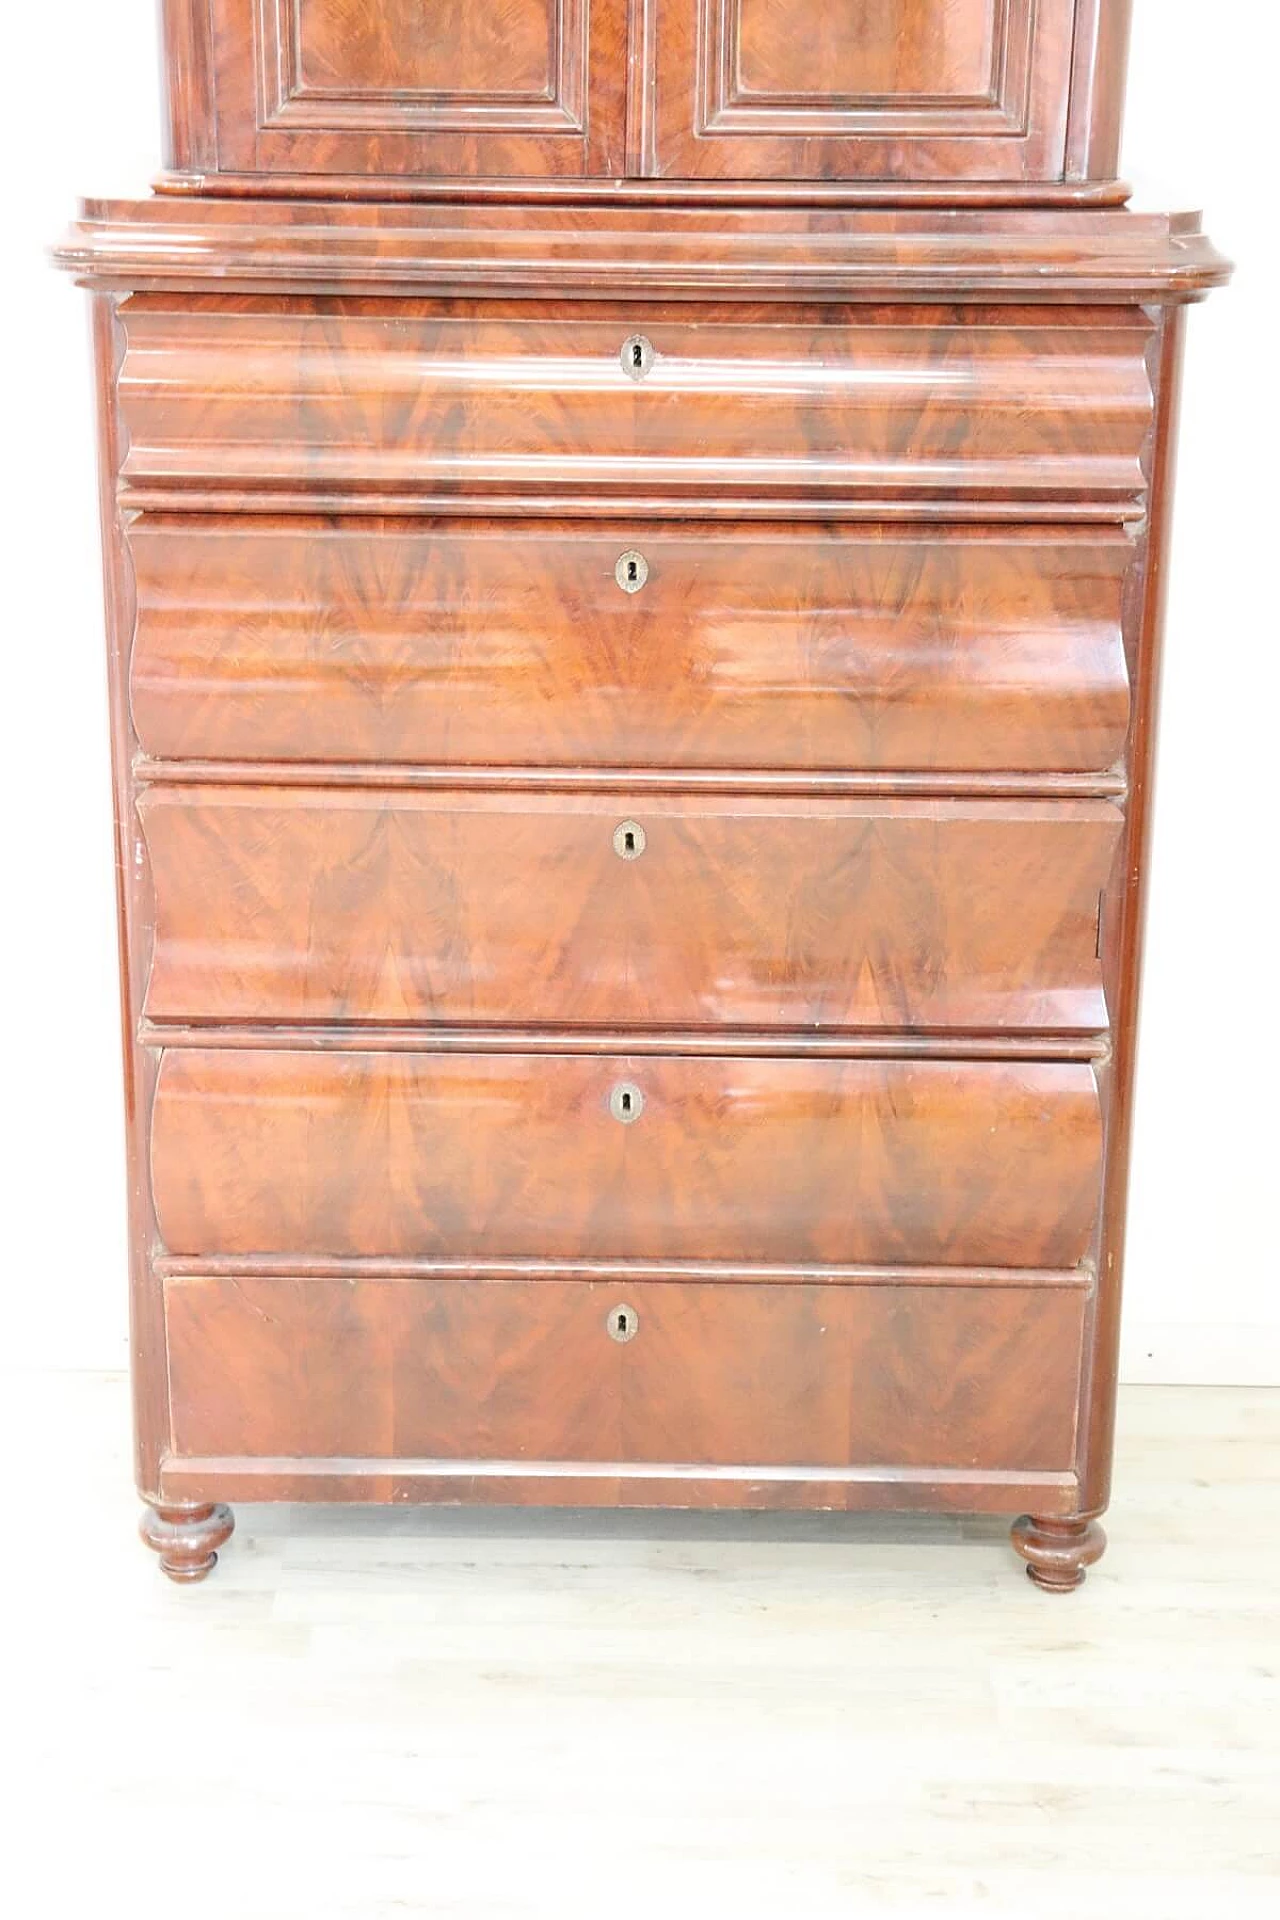 Antique chest of drawers with mahogany riser, 19th century 1067723